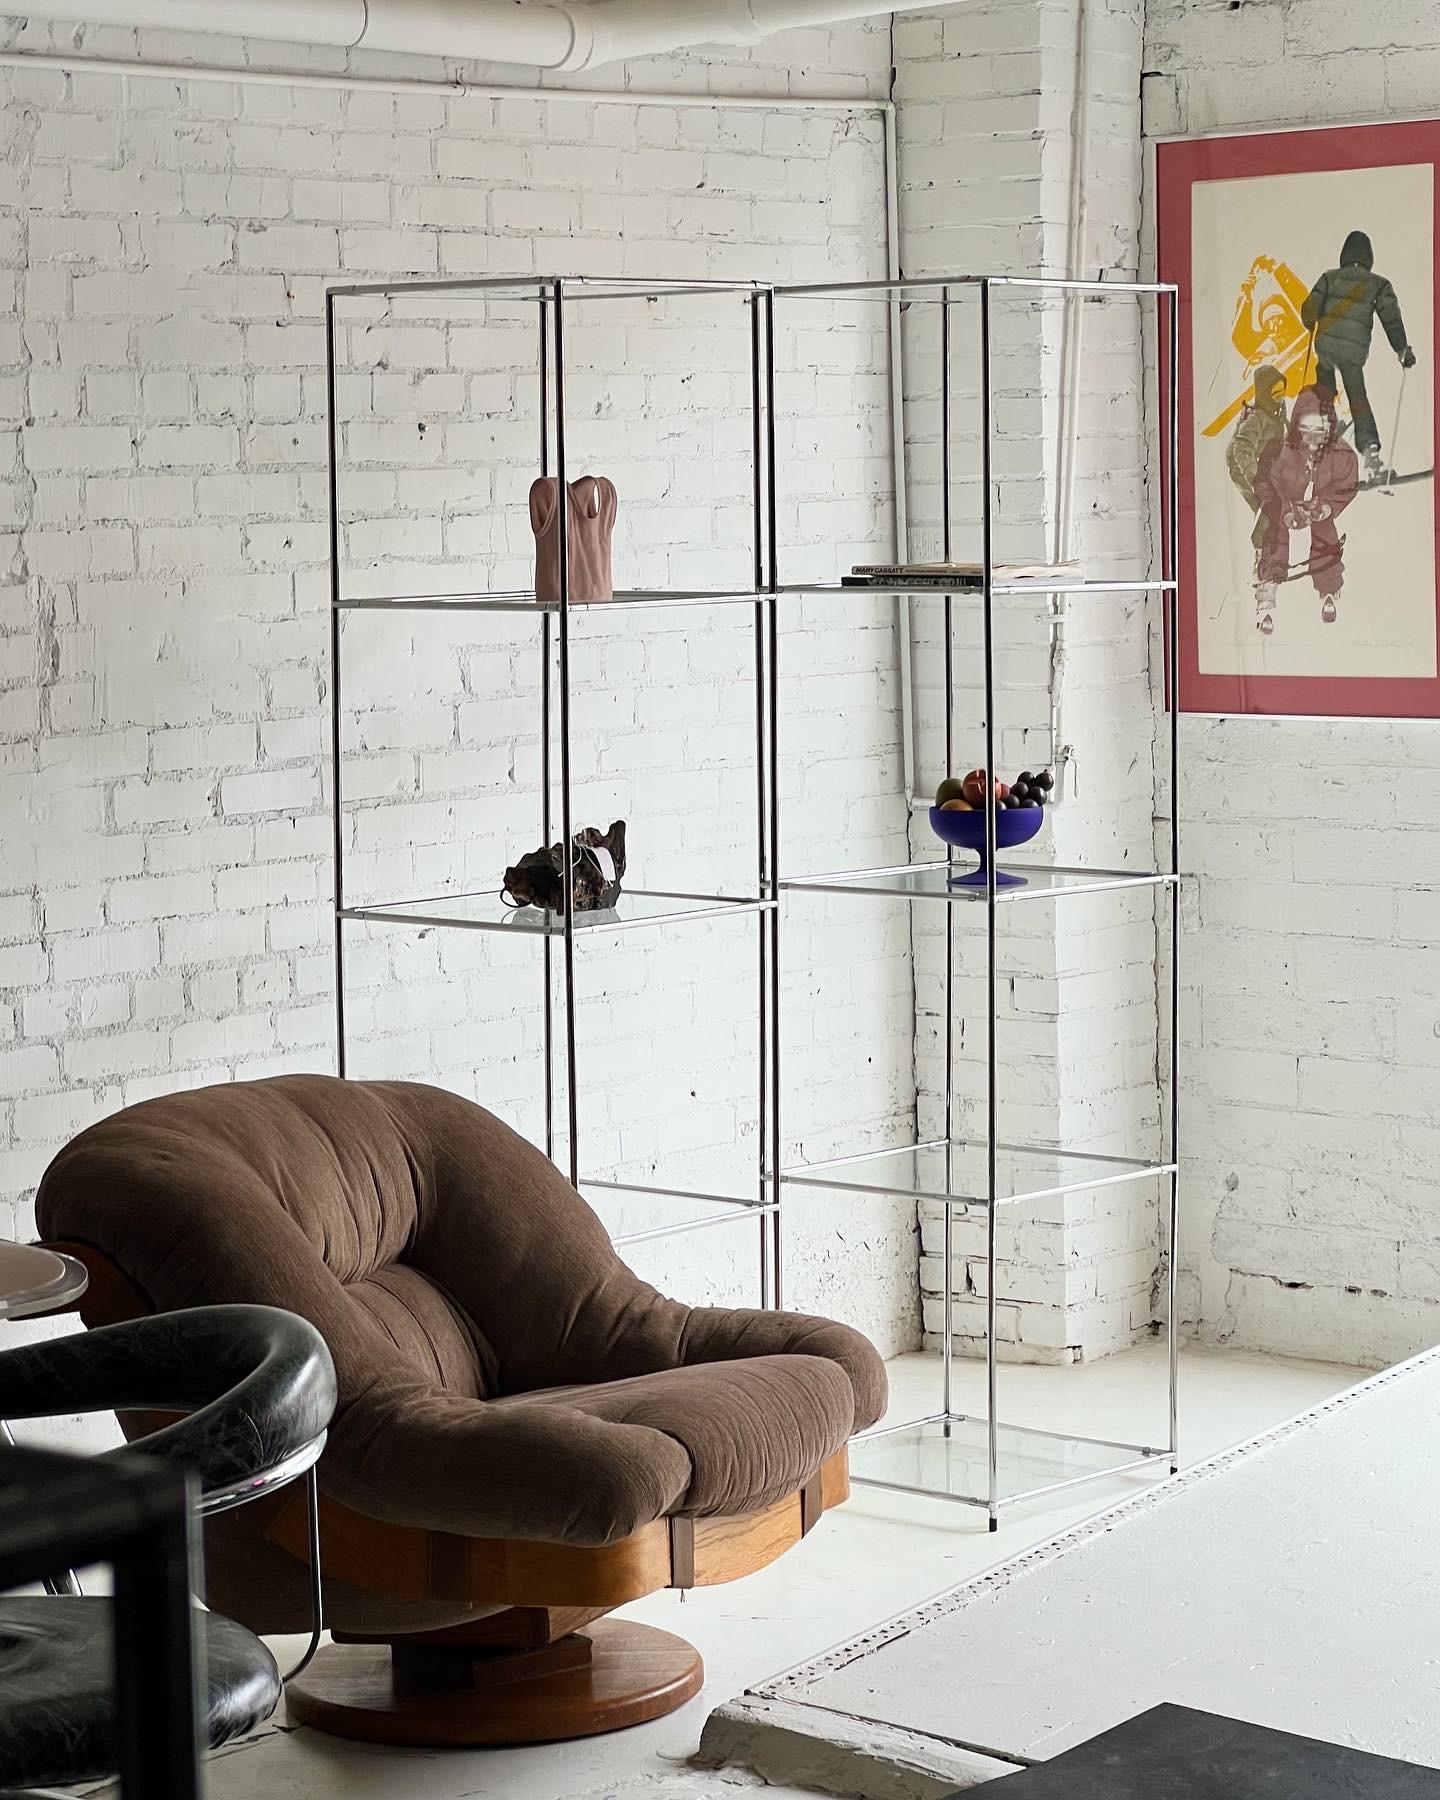 Poul Cadovius’s “Abstracta” bookcases c. 1960’s. A sleek & sophisticated space age staple.

Tall & wide enough for bigger décor, a record player, mcm speakers, taller plants, you name it.

Somewhat modular. Can be taken apart and made shorter or